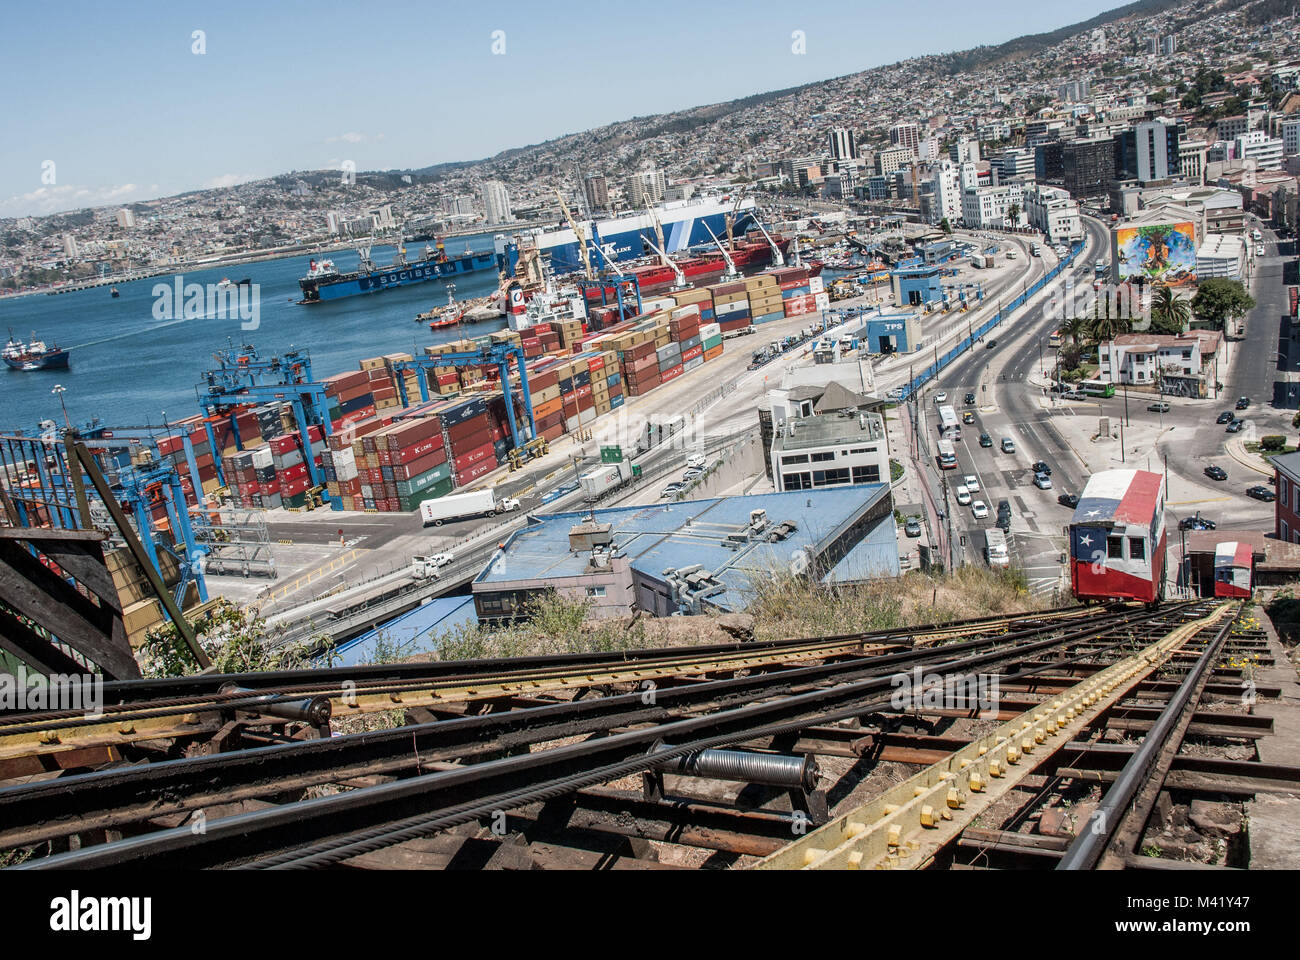 a view of the harbor of the city of Valparaiso showing its buildings and a funicular railway Stock Photo